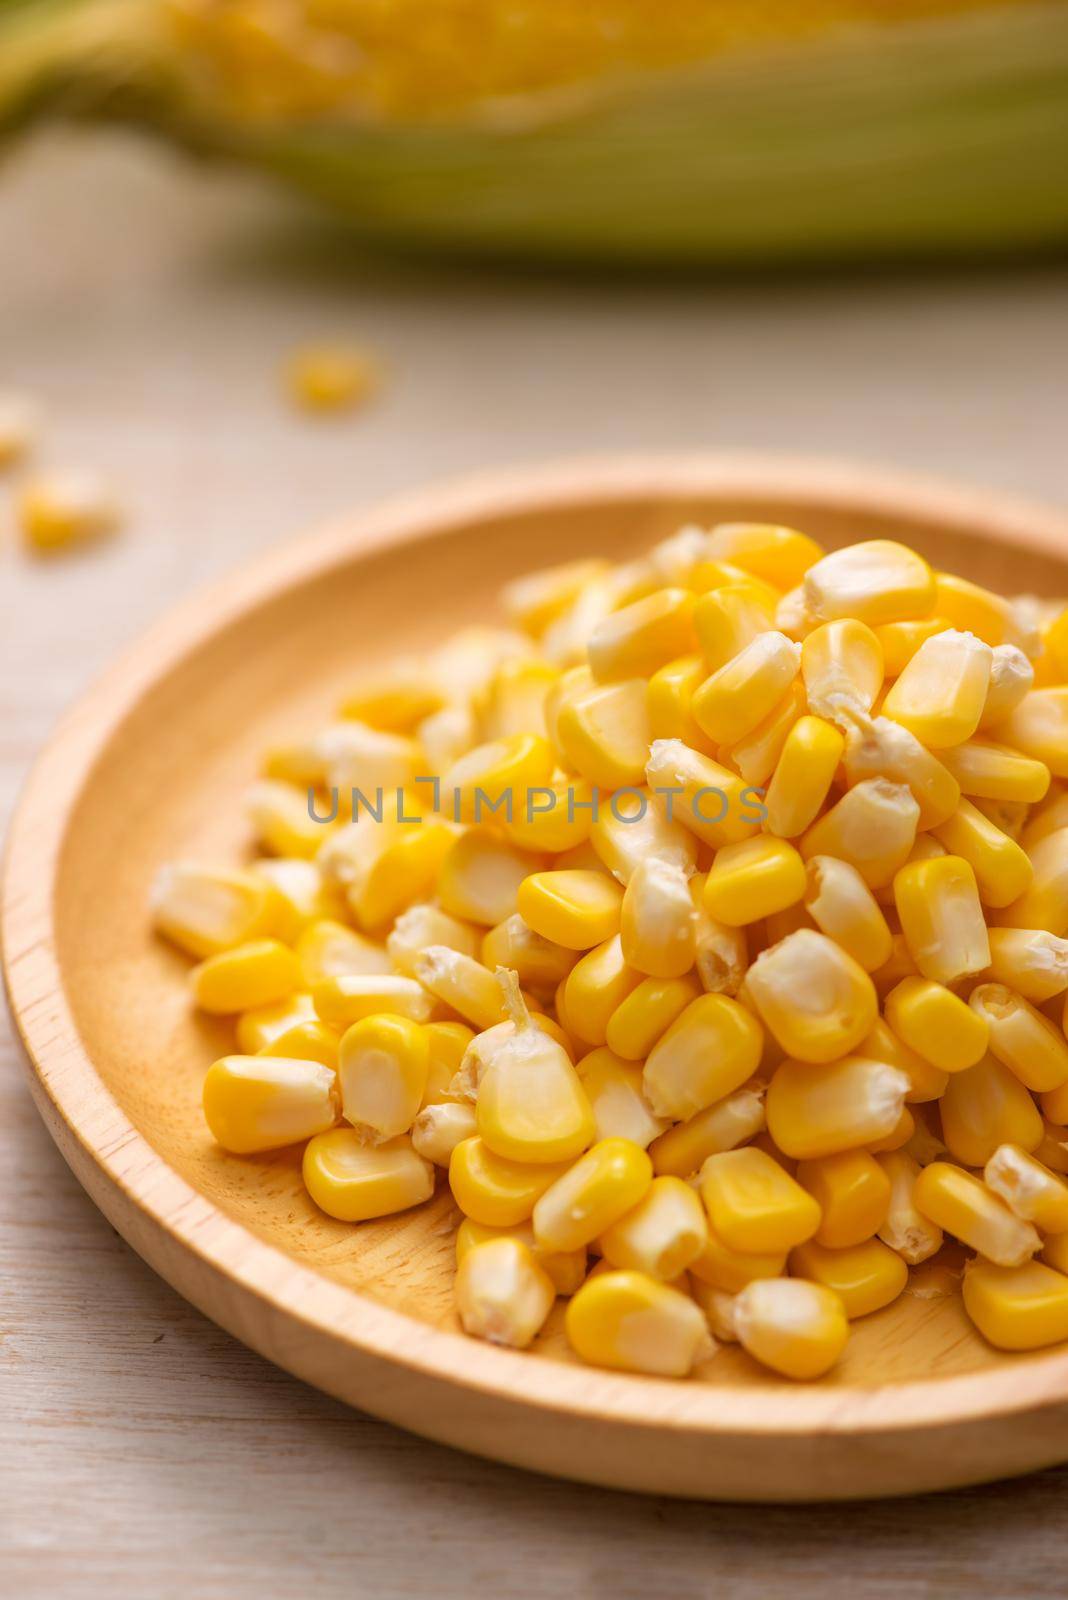 Sweet corn seeds on a wooden plate 